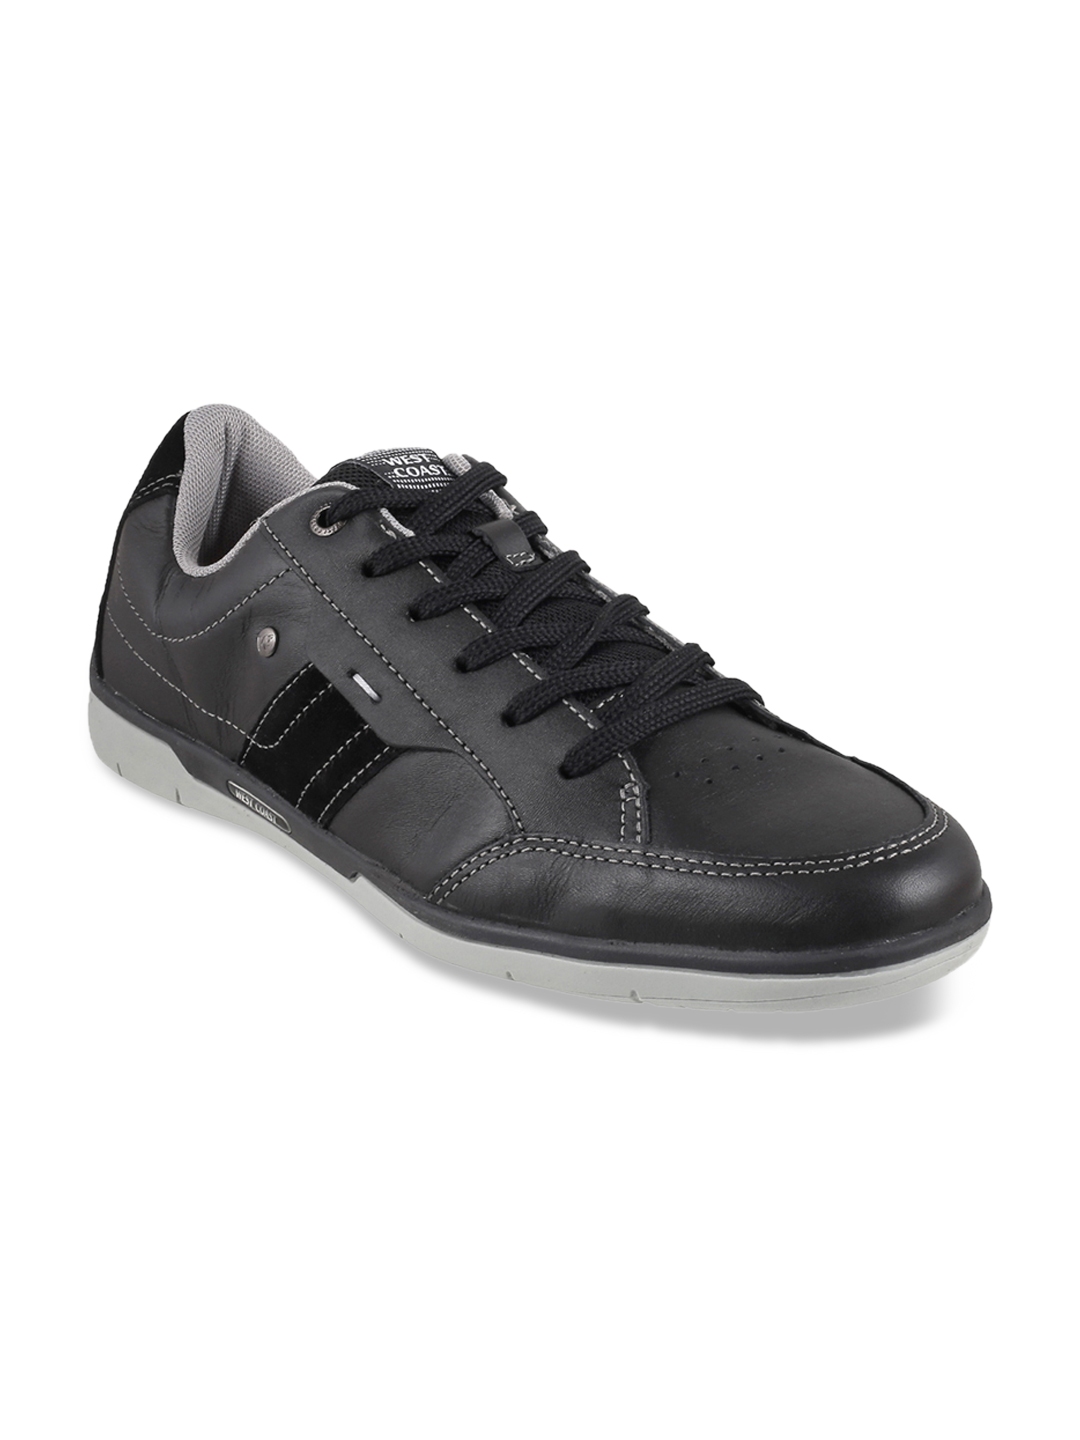 Buy WEST COAST Men Black Leather Sneakers - Casual Shoes for Men ...